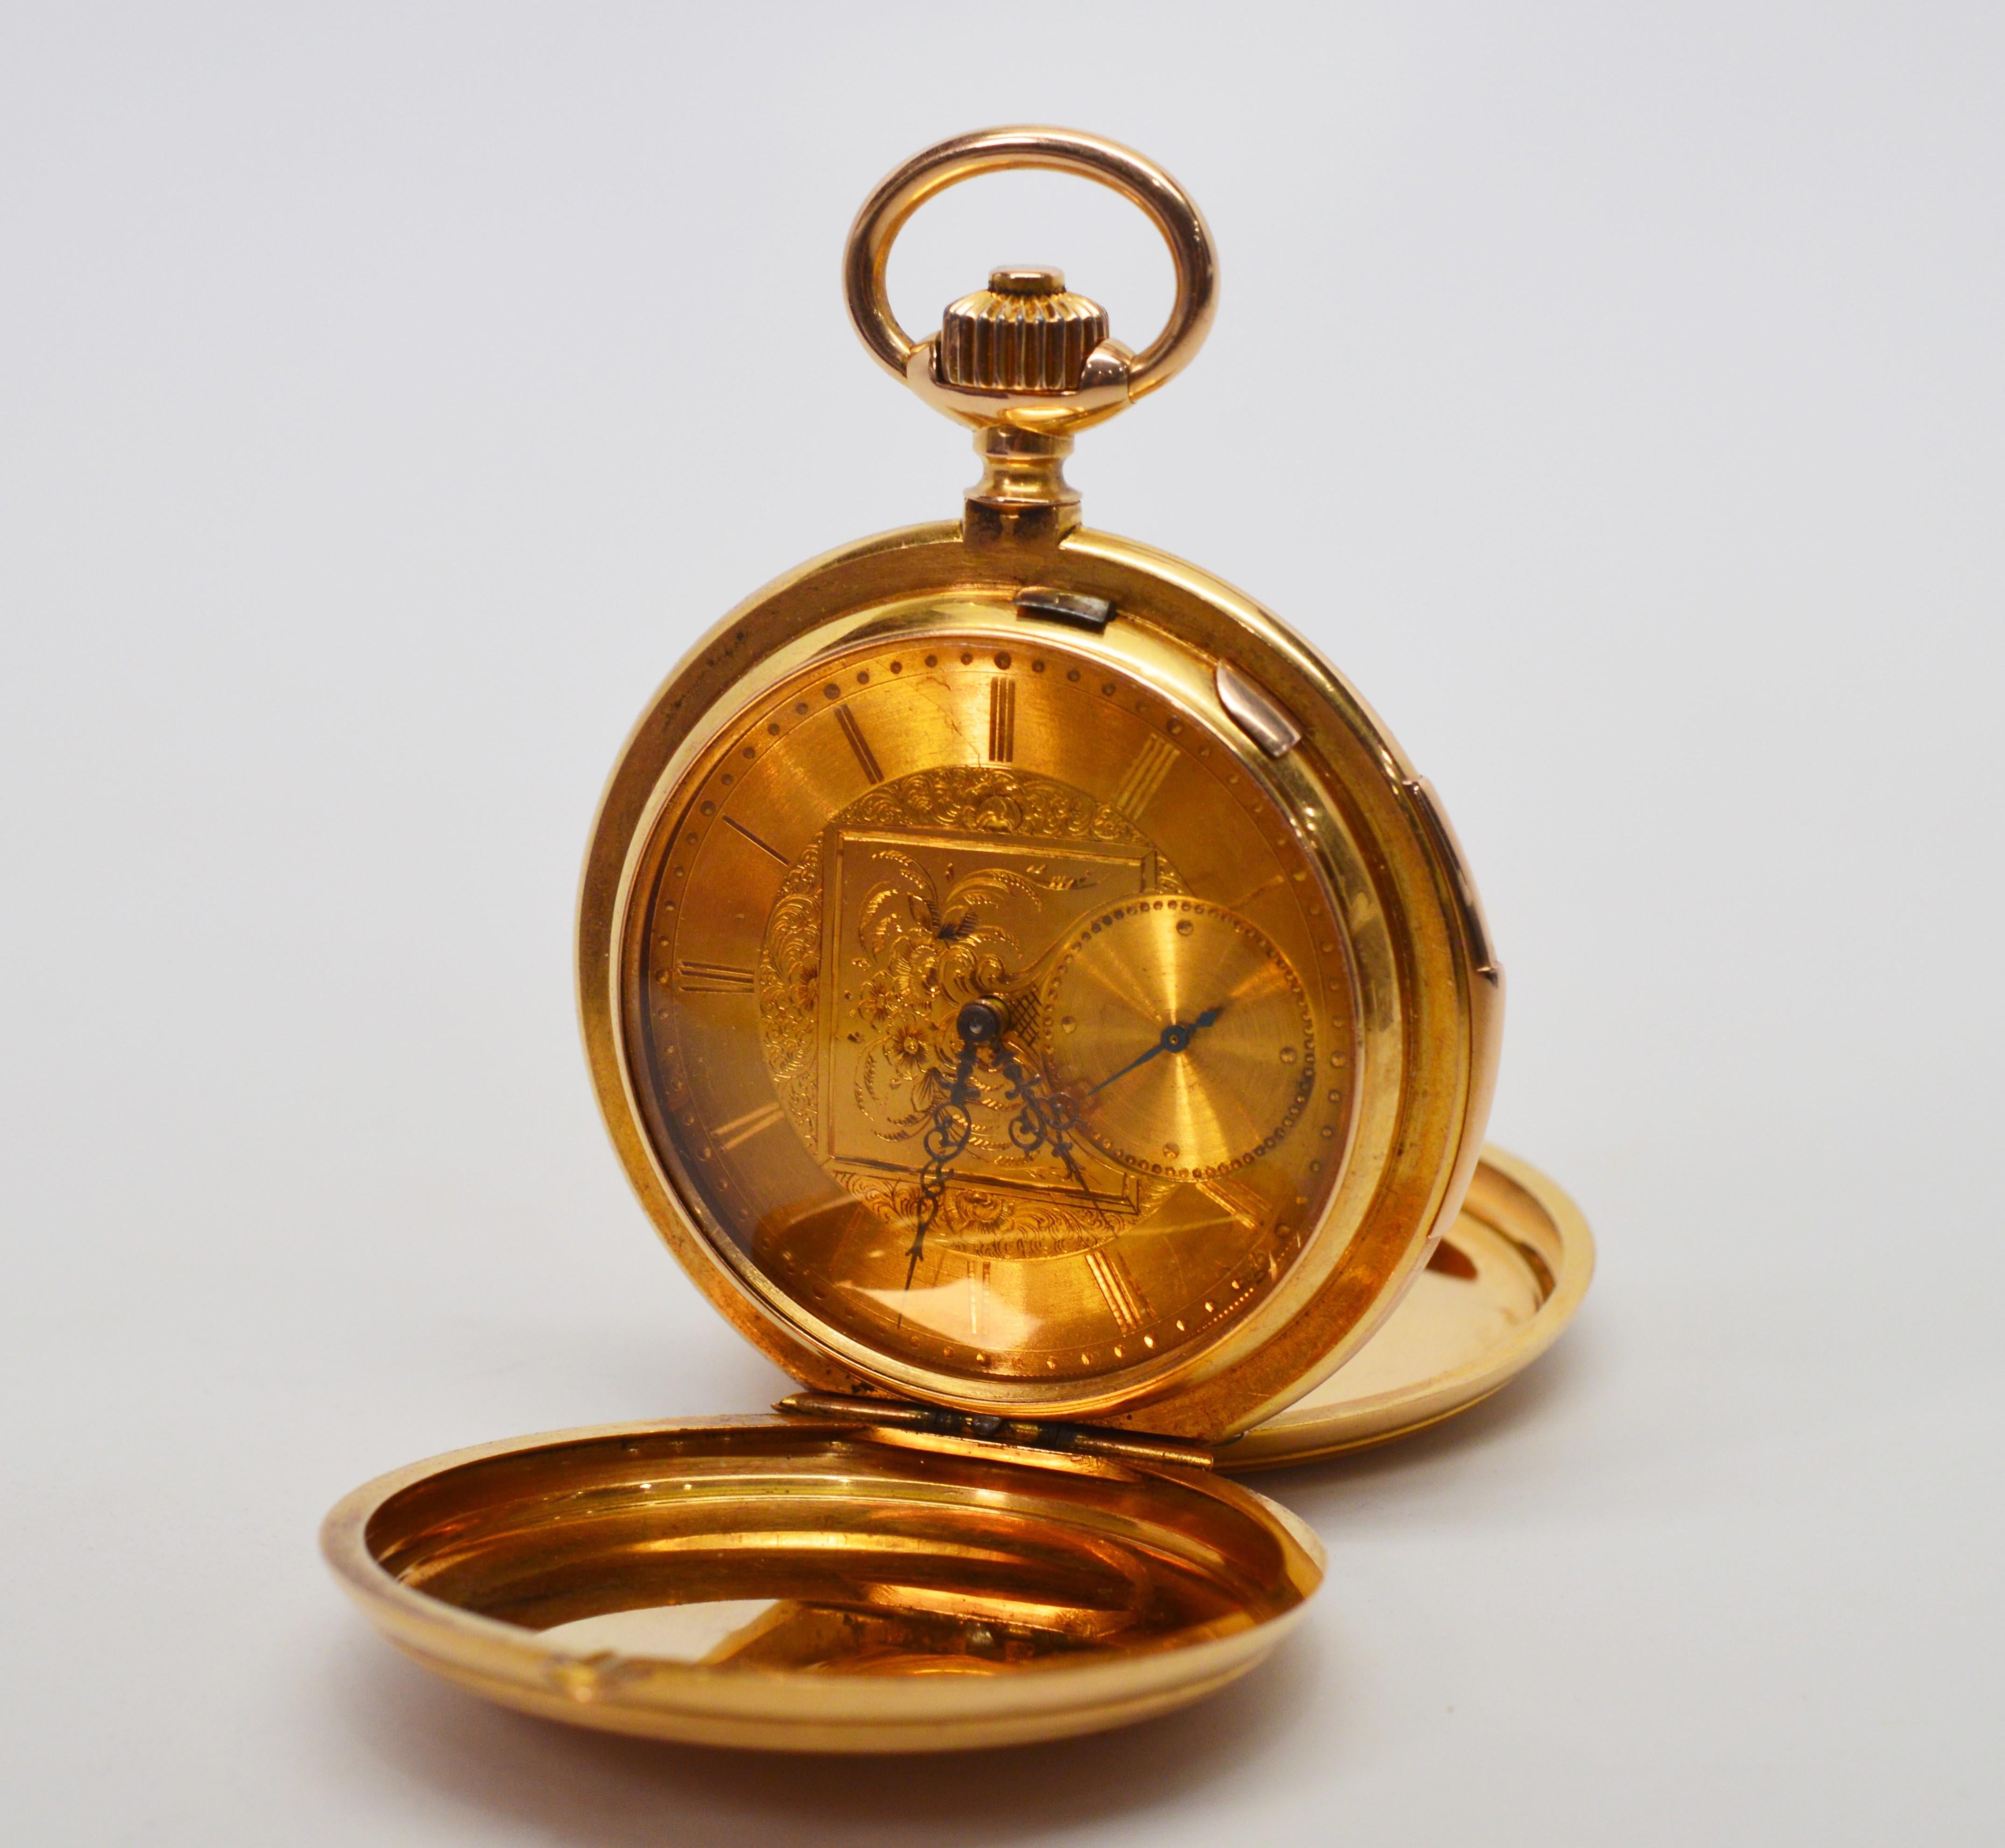 Mint condition eighteen karat yellow gold LeCoultre Quarter Hour Repeater Pocket Watch with display back that allows view of intricate movement in motion. Early Calibre 31, circa 1880-1890. Stem wound, pin set, wolfs tooth winding wheels, 29 jeweled